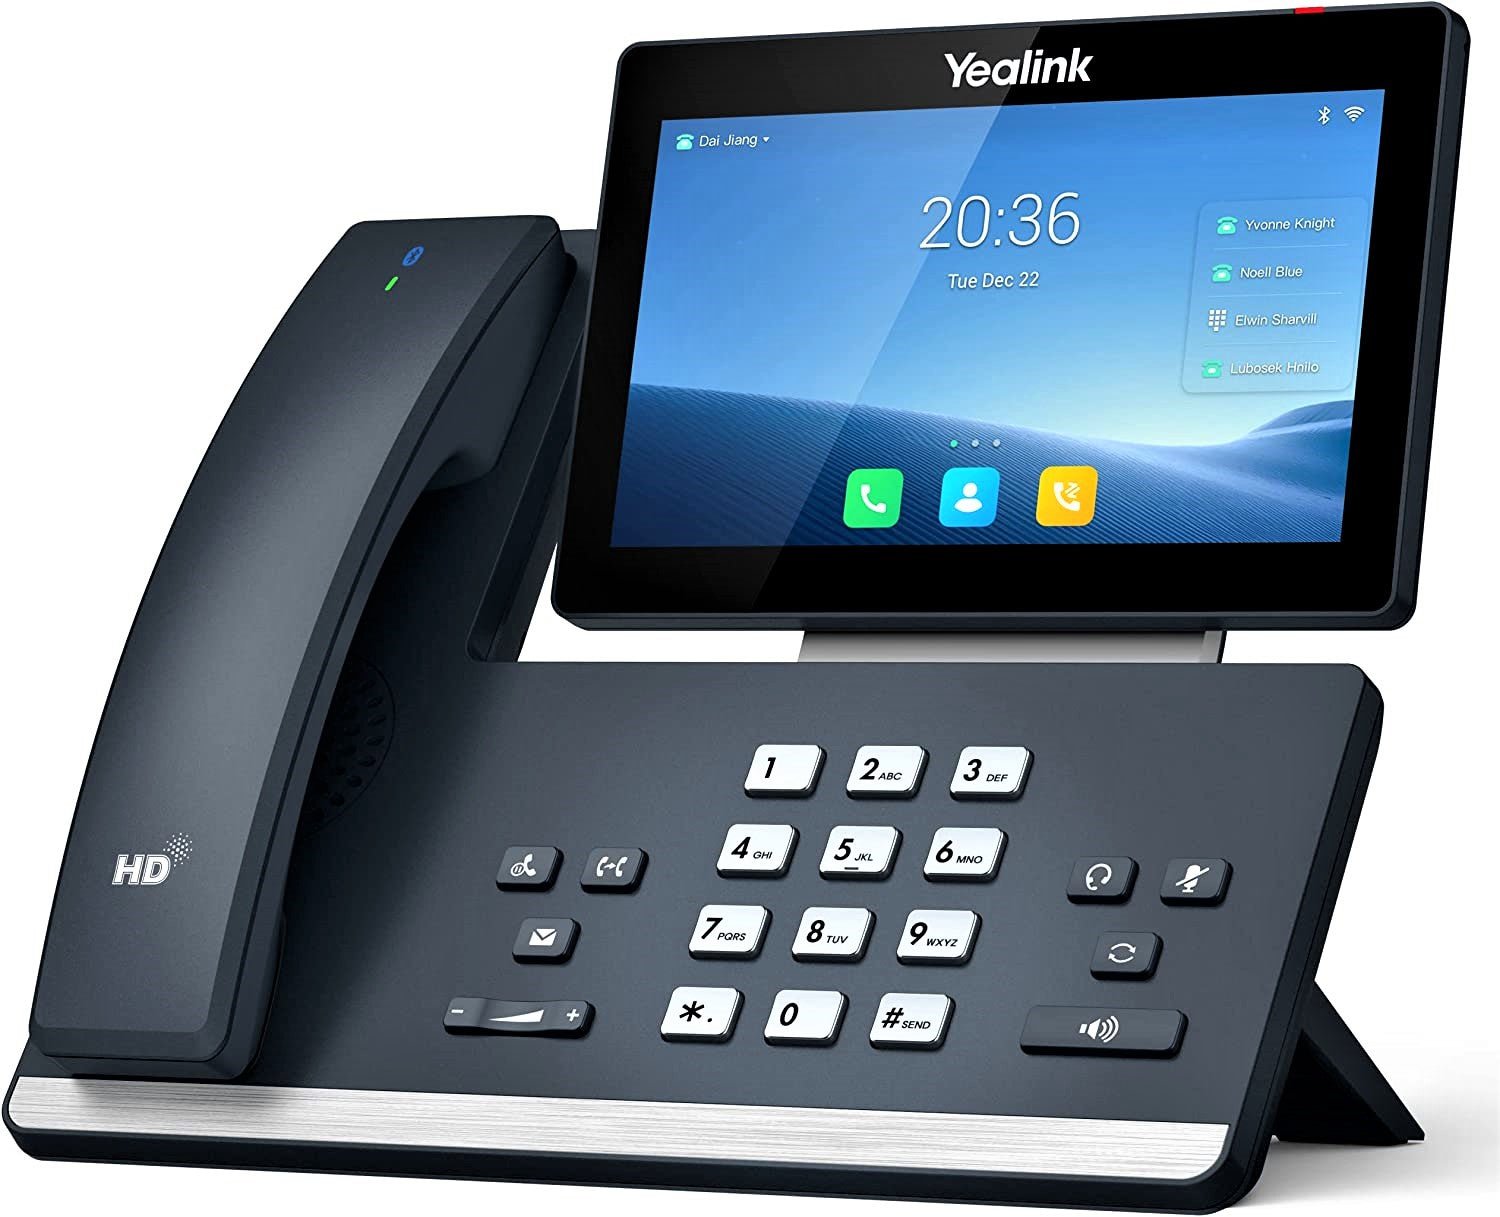 Yealink T58W Pro IP Phone - Corded/Cordless - Corded/Cordless - Wi-Fi, DECT, Bluetooth - Desktop, Wall Mountable - Classic Gray